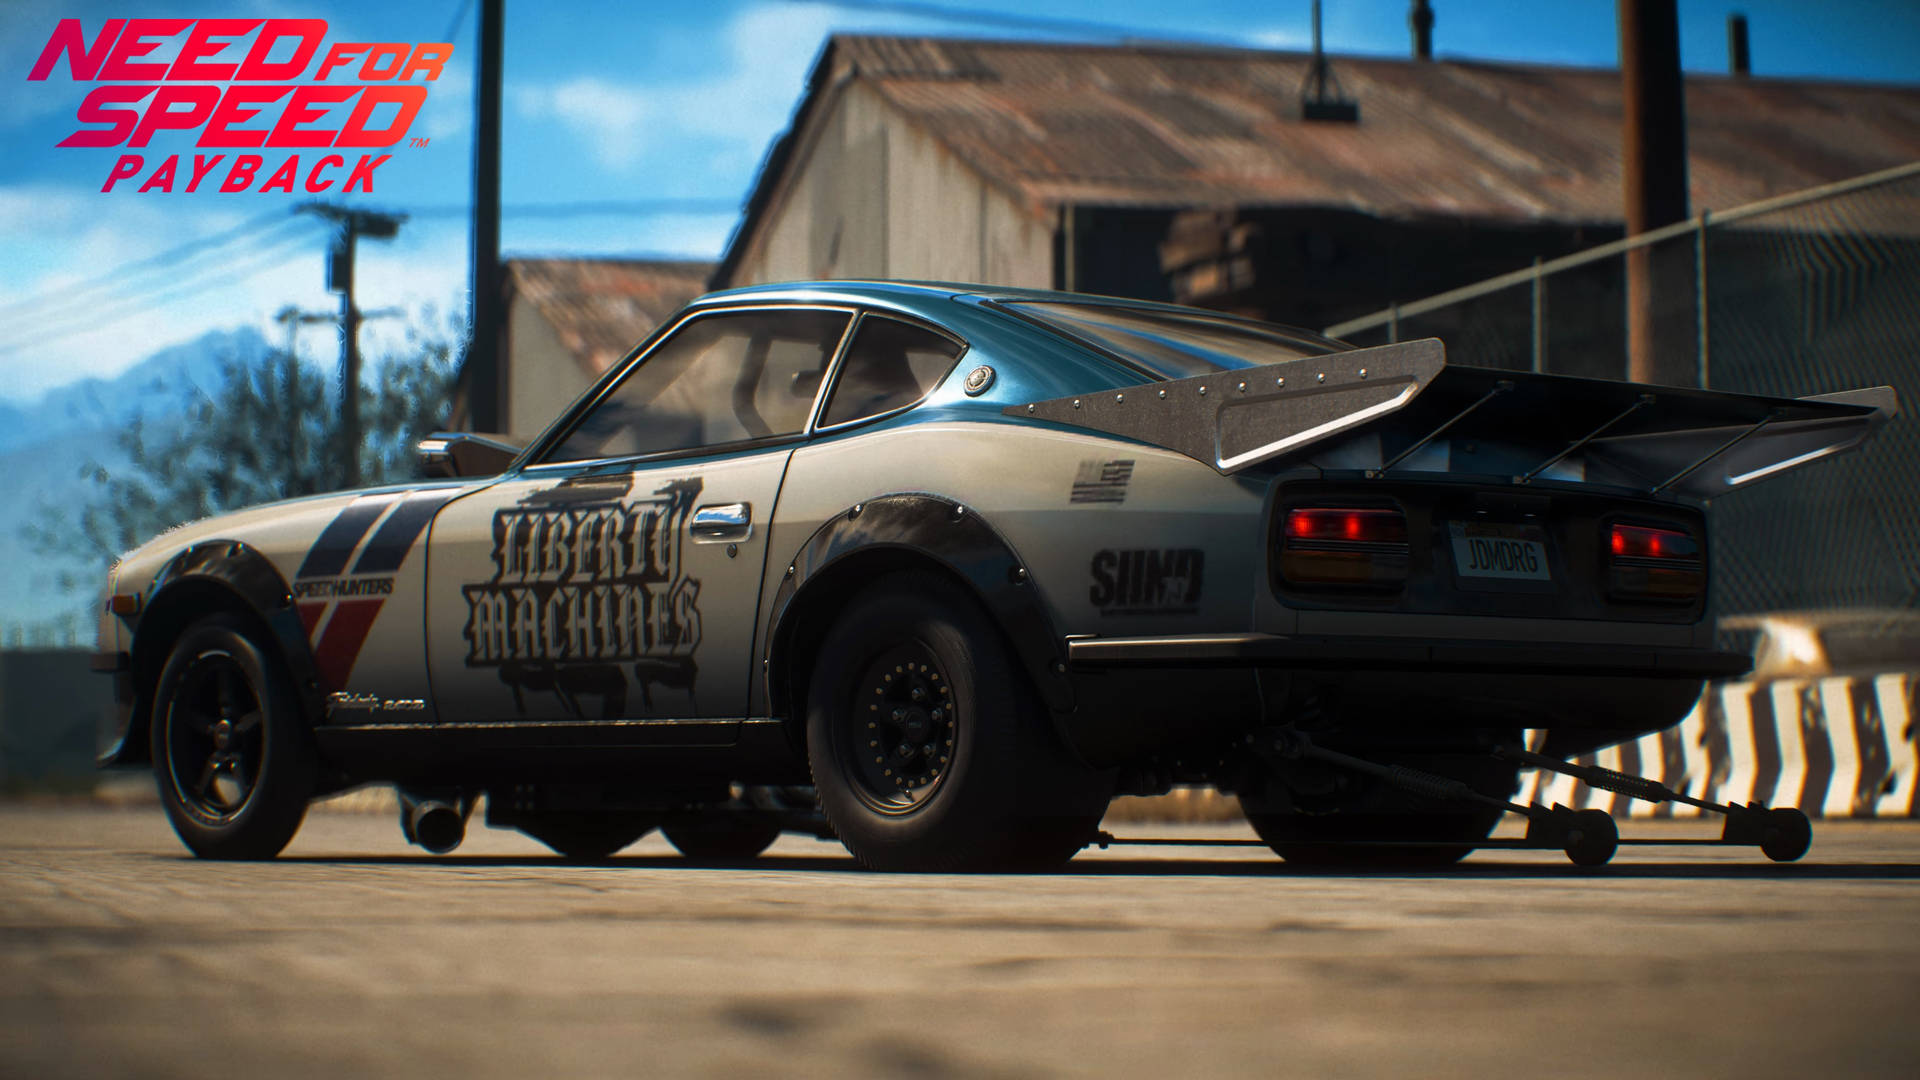 Need For Speed Payback Nissan Fairlady Background